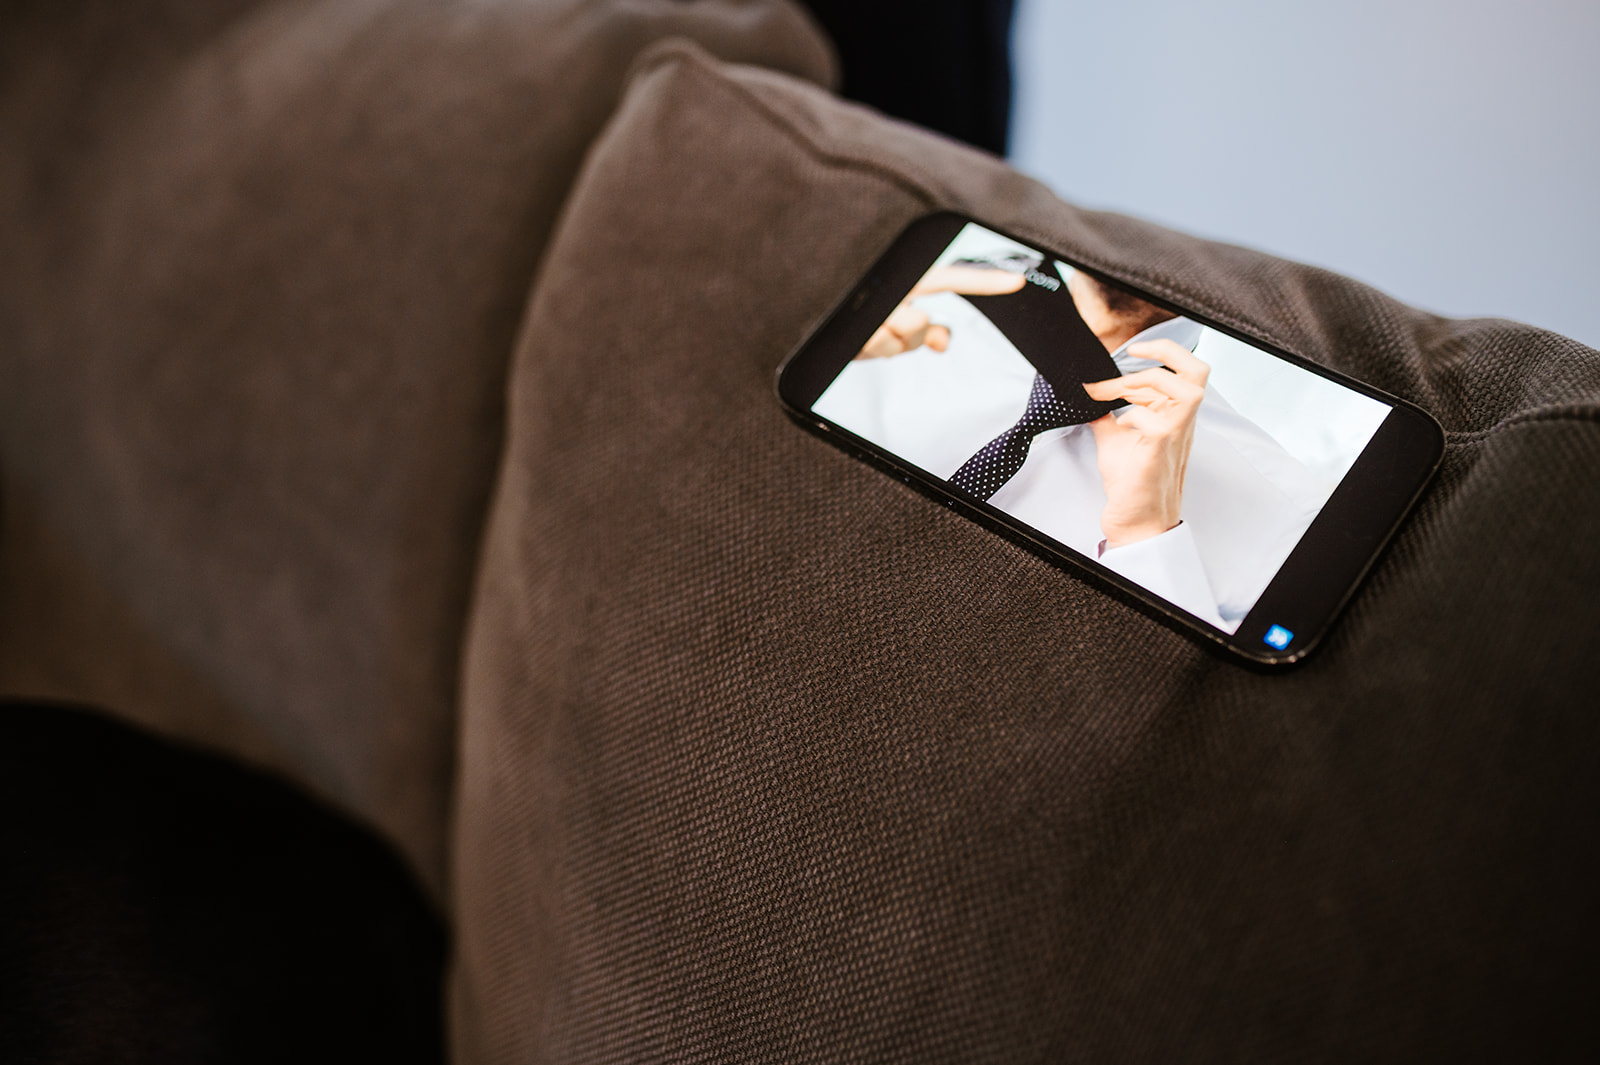 Mobile phone on cushion with video of tie being tied on screen